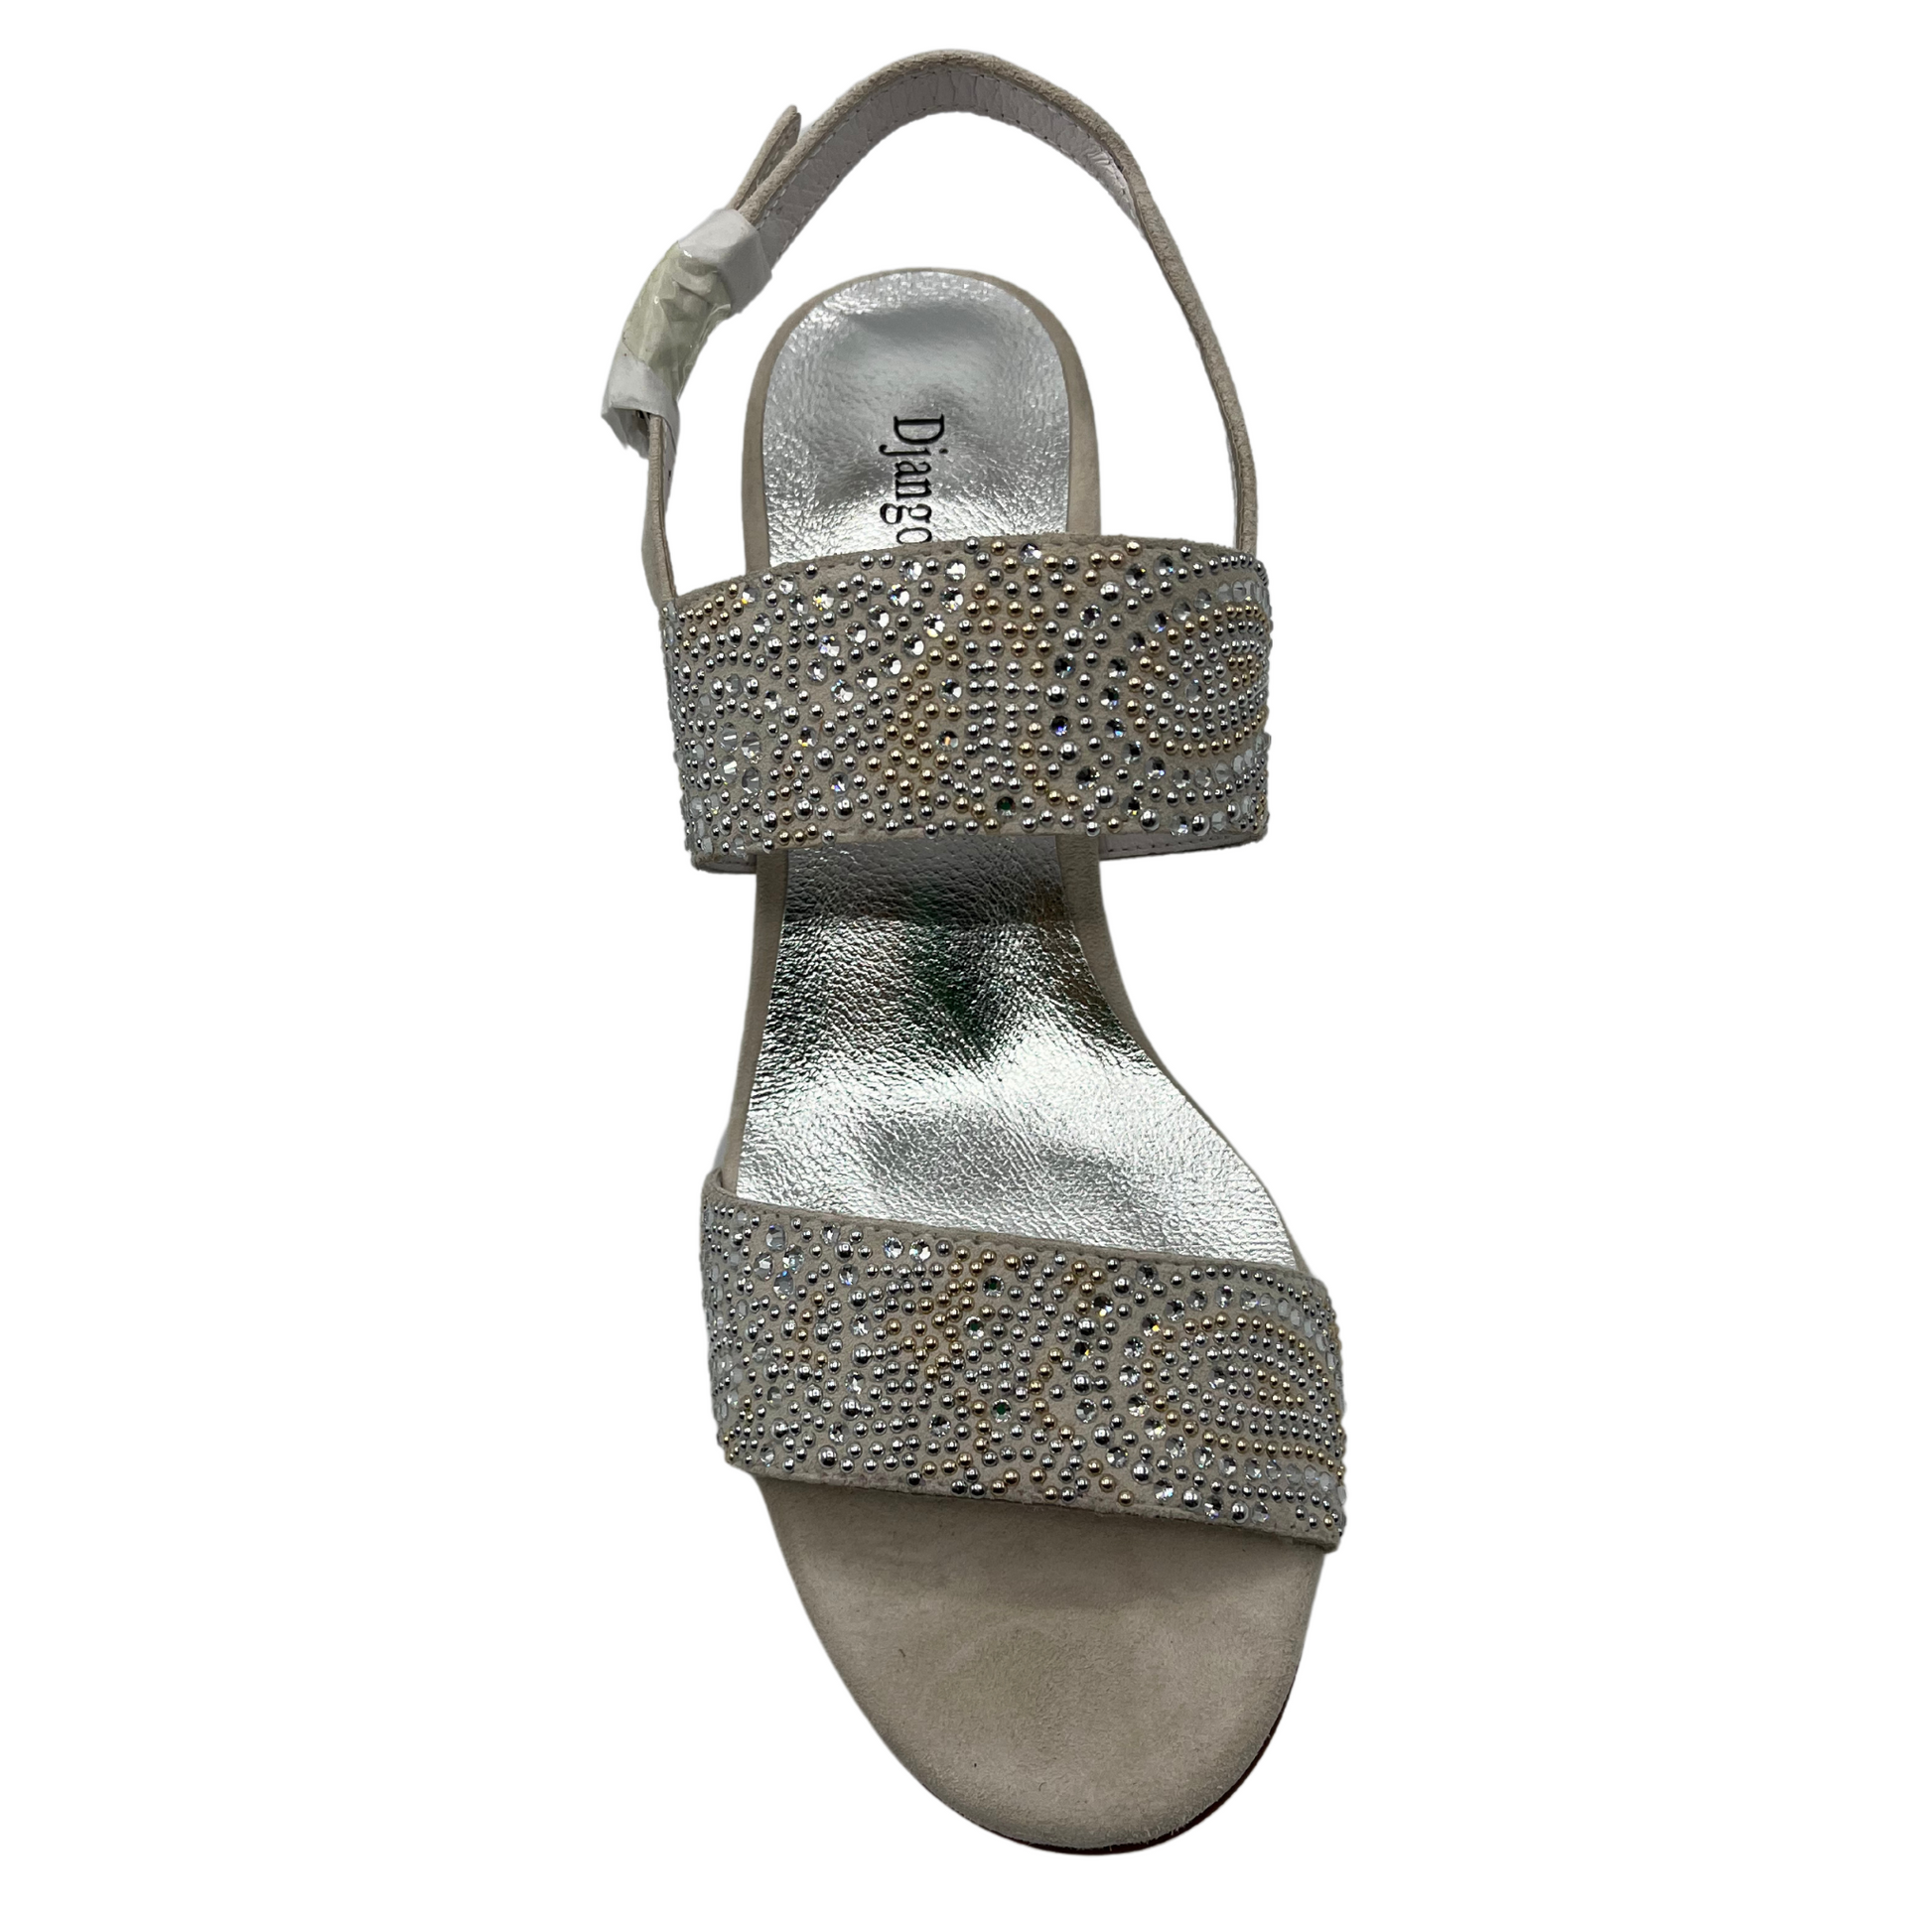 Top view of silver suede and leather sandal with beaded details and sling back strap